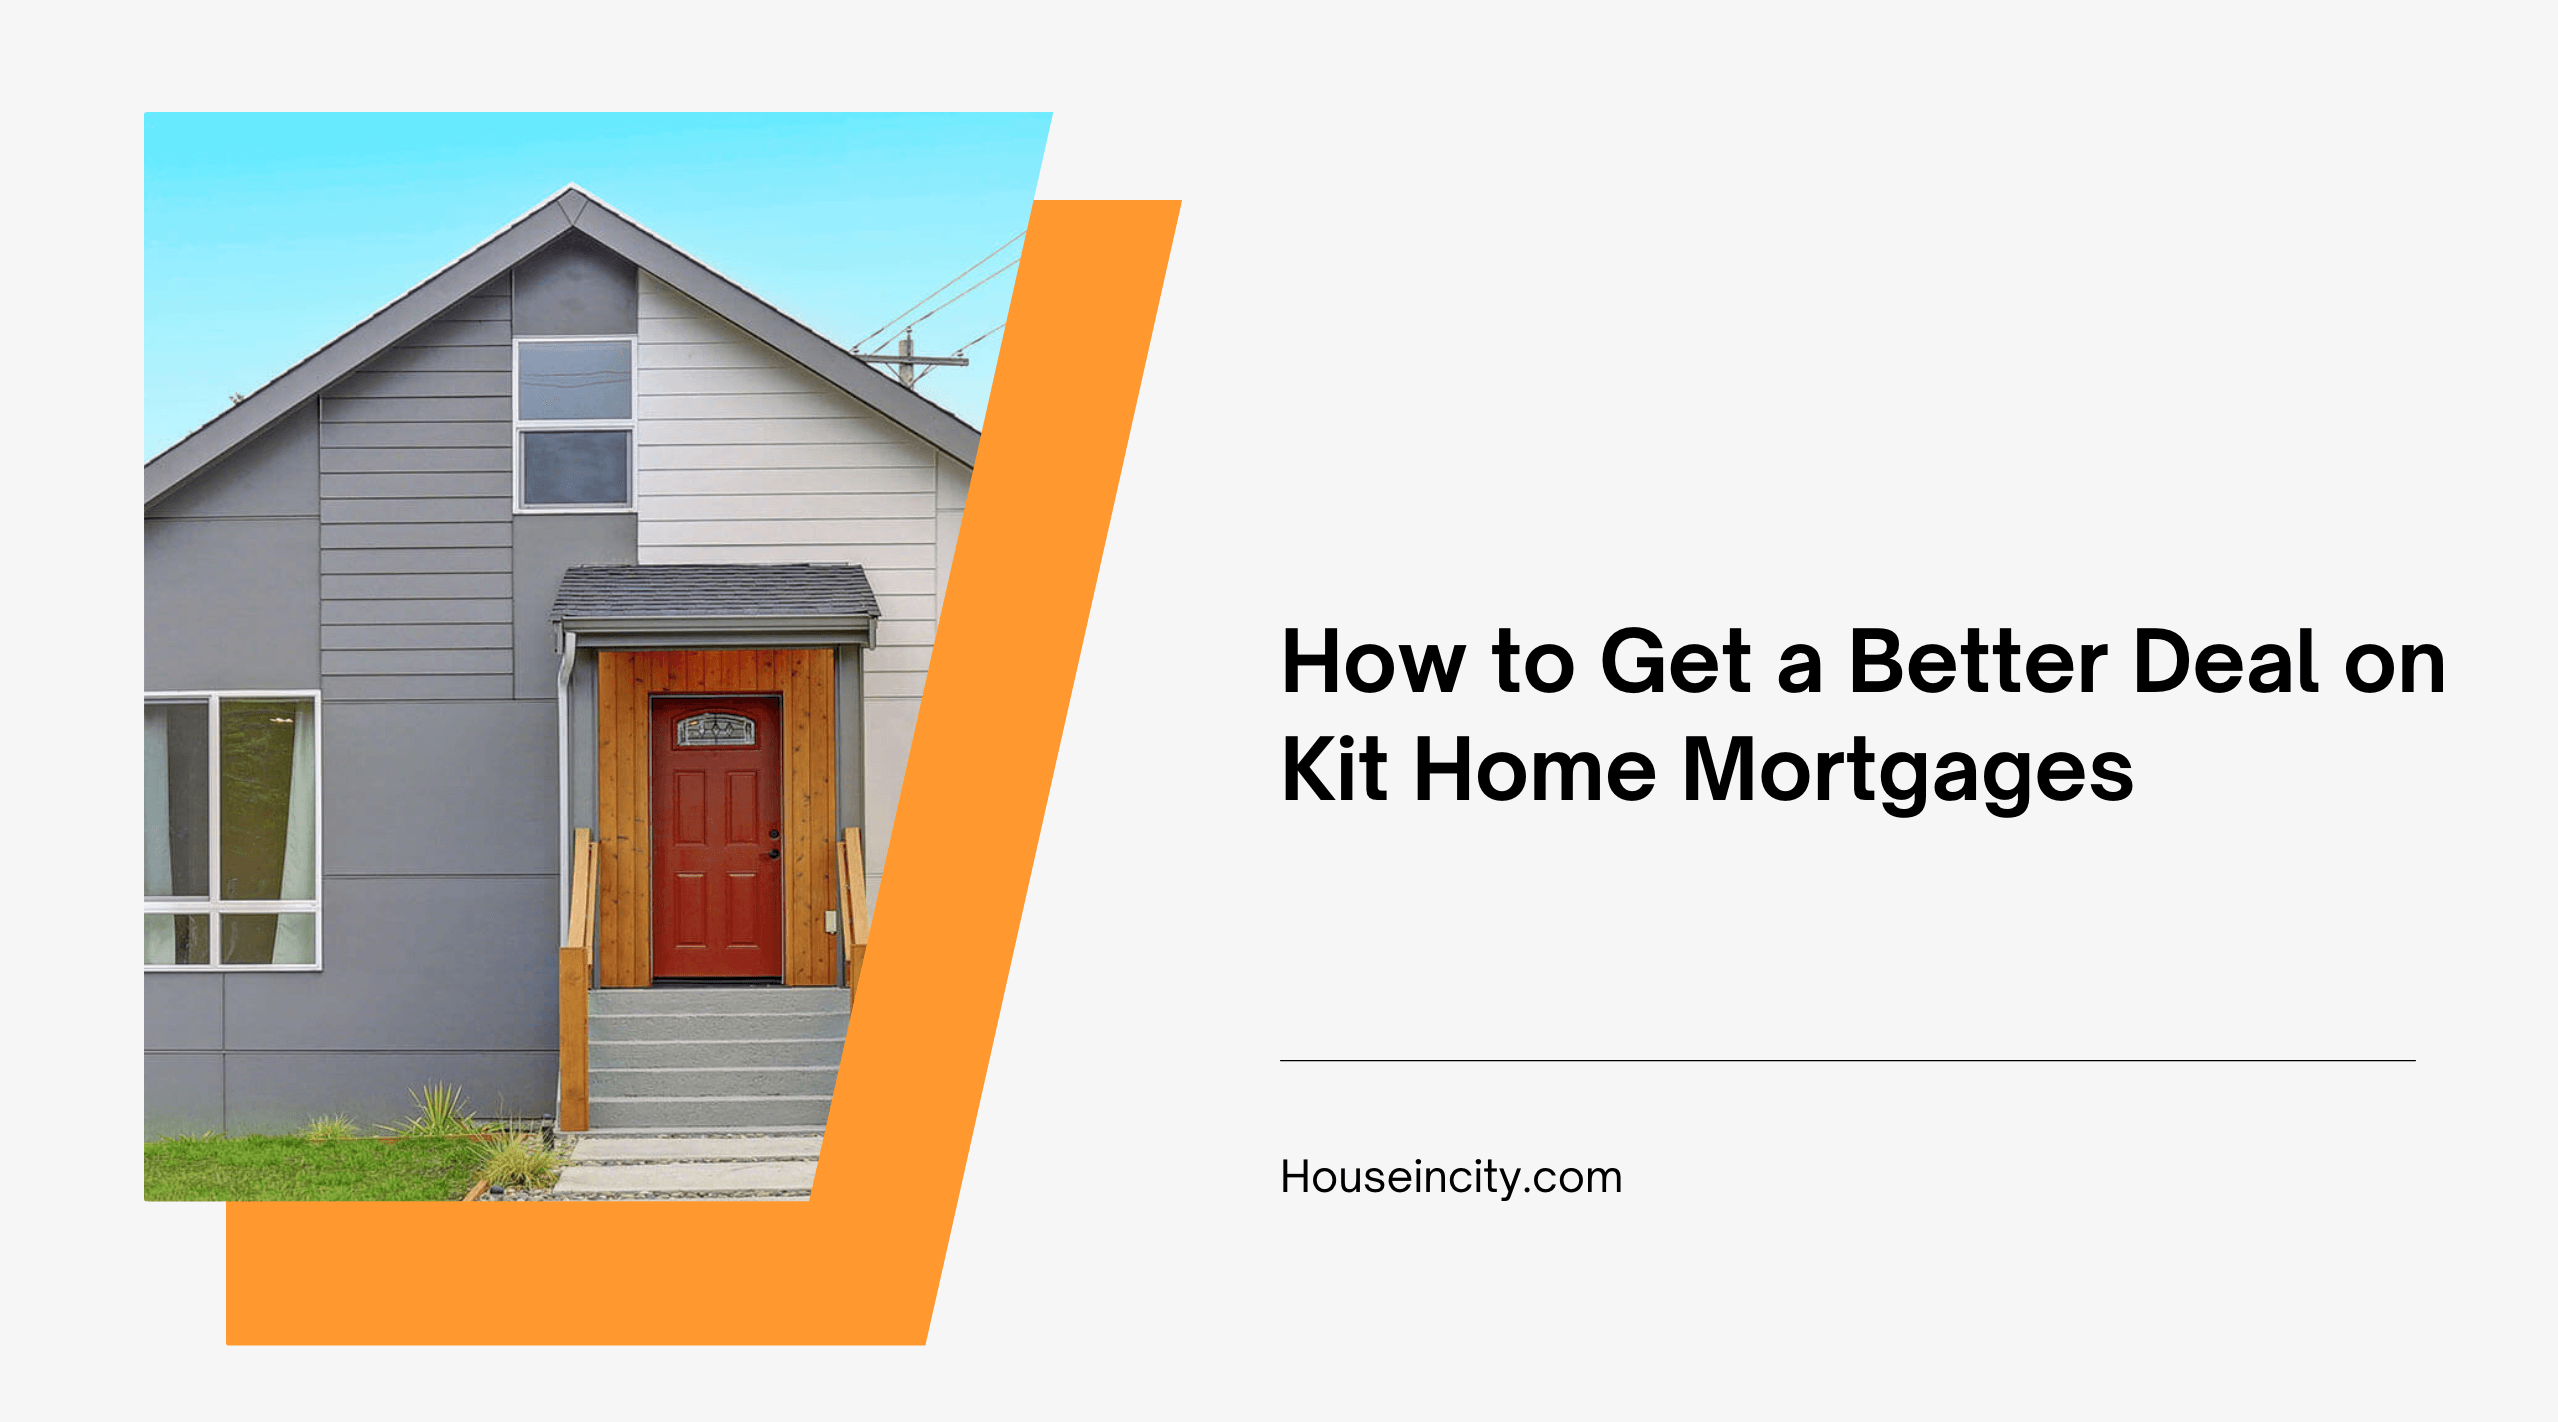 How to Get a Better Deal on Kit Home Mortgages